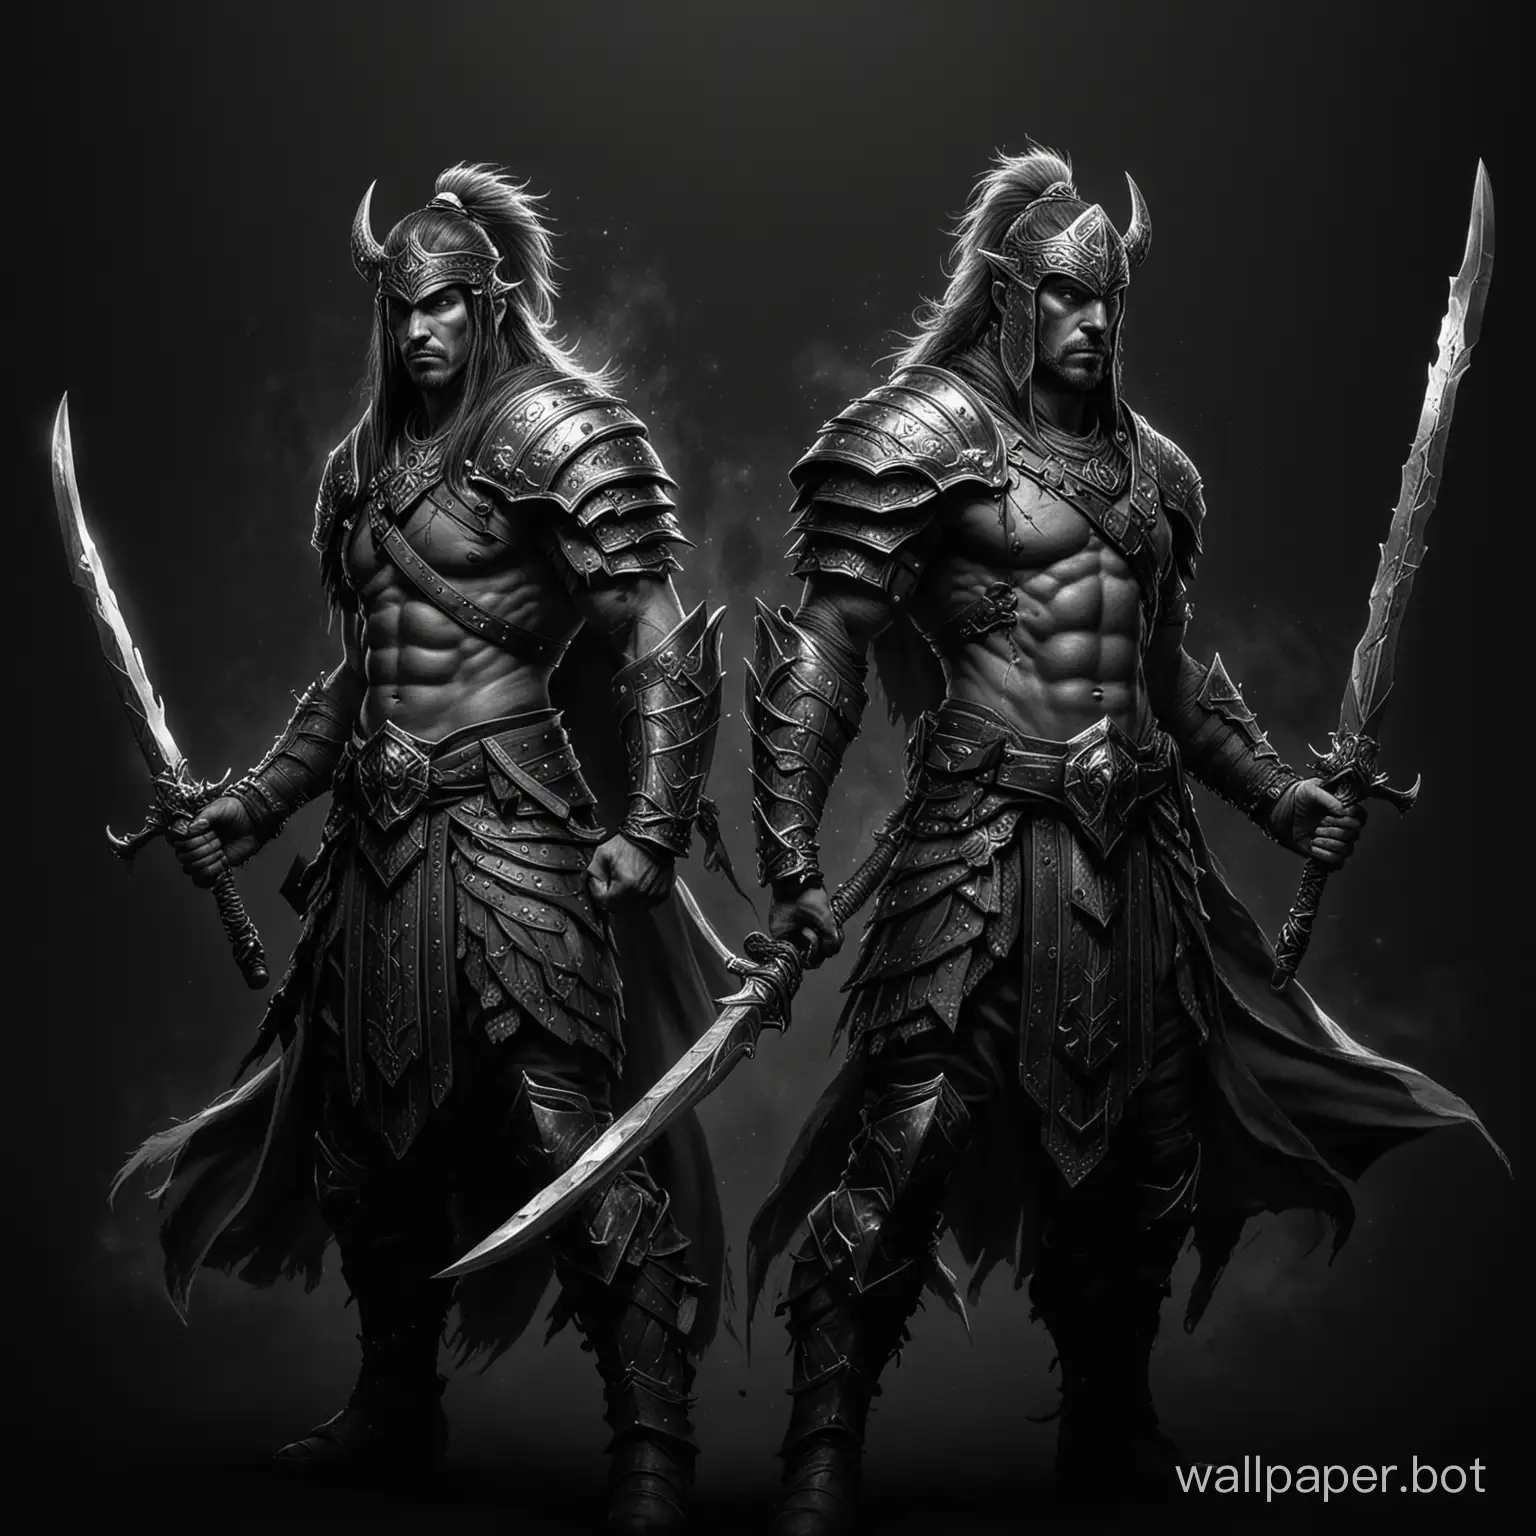 draw two fantasy warriors on a black background